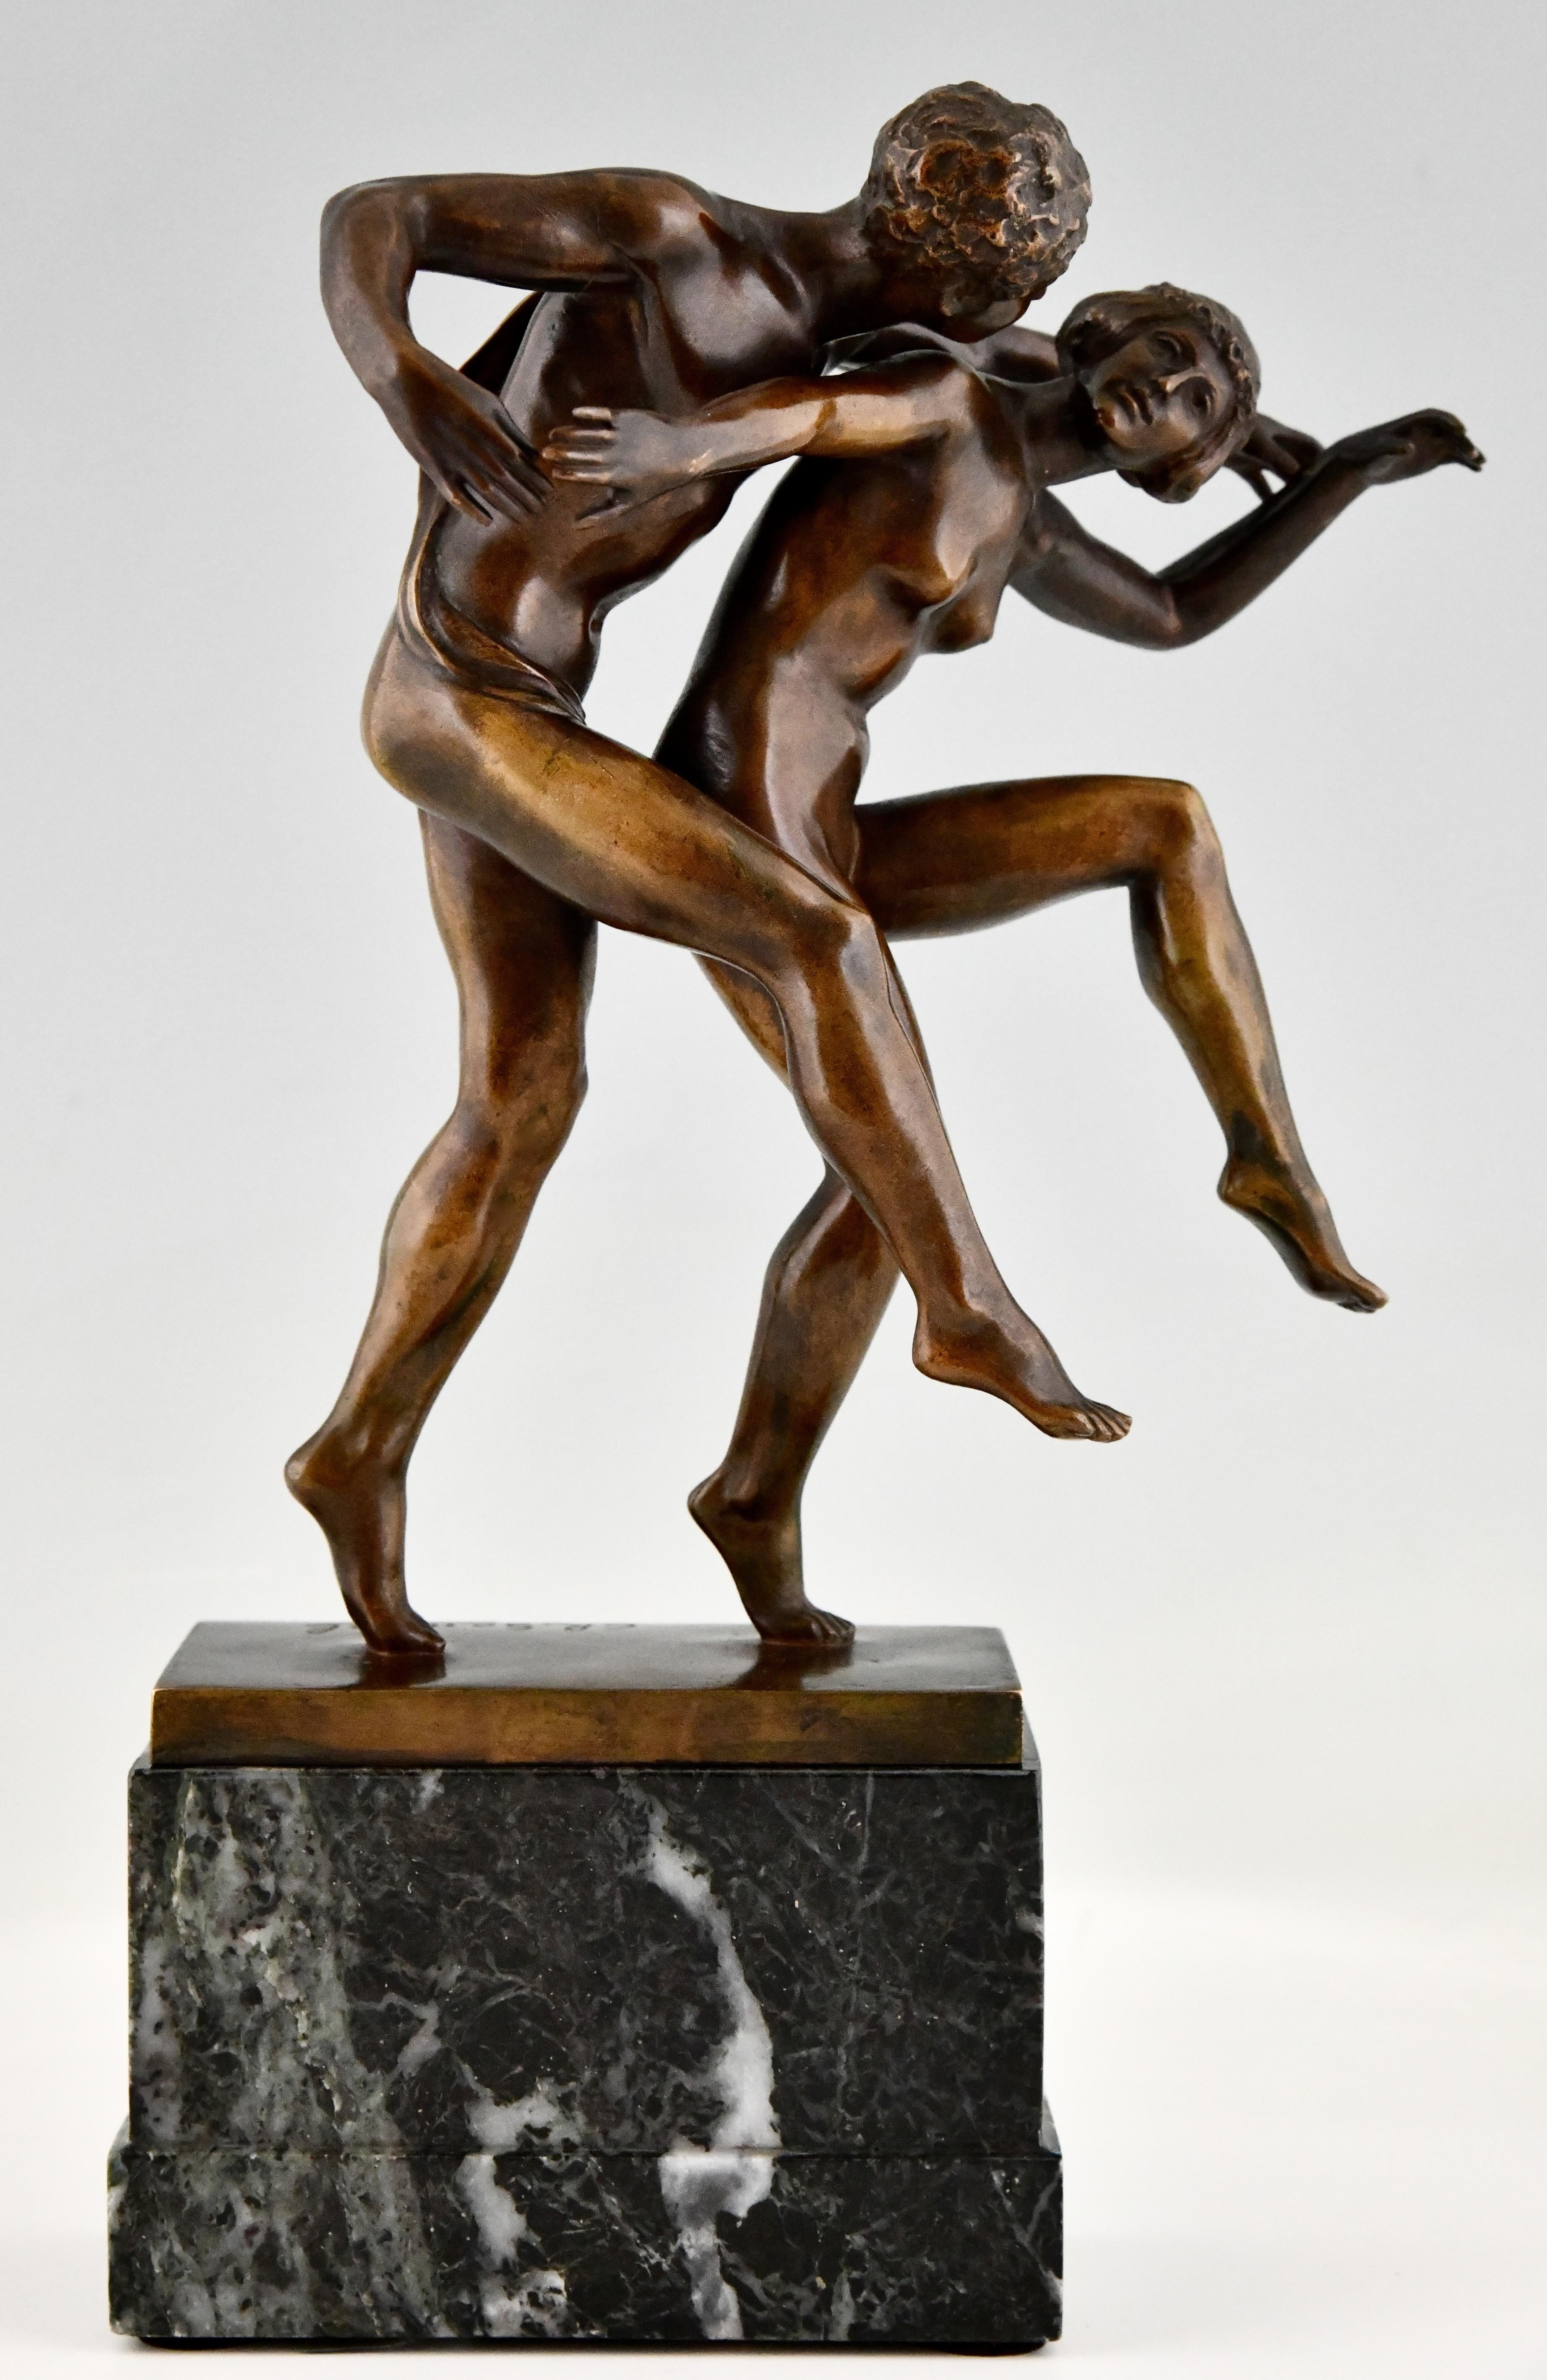 Art Nouveau bronze sculpture dancing nude couple, La Danse by Charles Samuel. 
Patinated bronze on a marble base. 
Belgium ca. 1900. 
This bronze is illustrated in:
Beeldhouwkunst in België, Engelen Marx.
More information about the